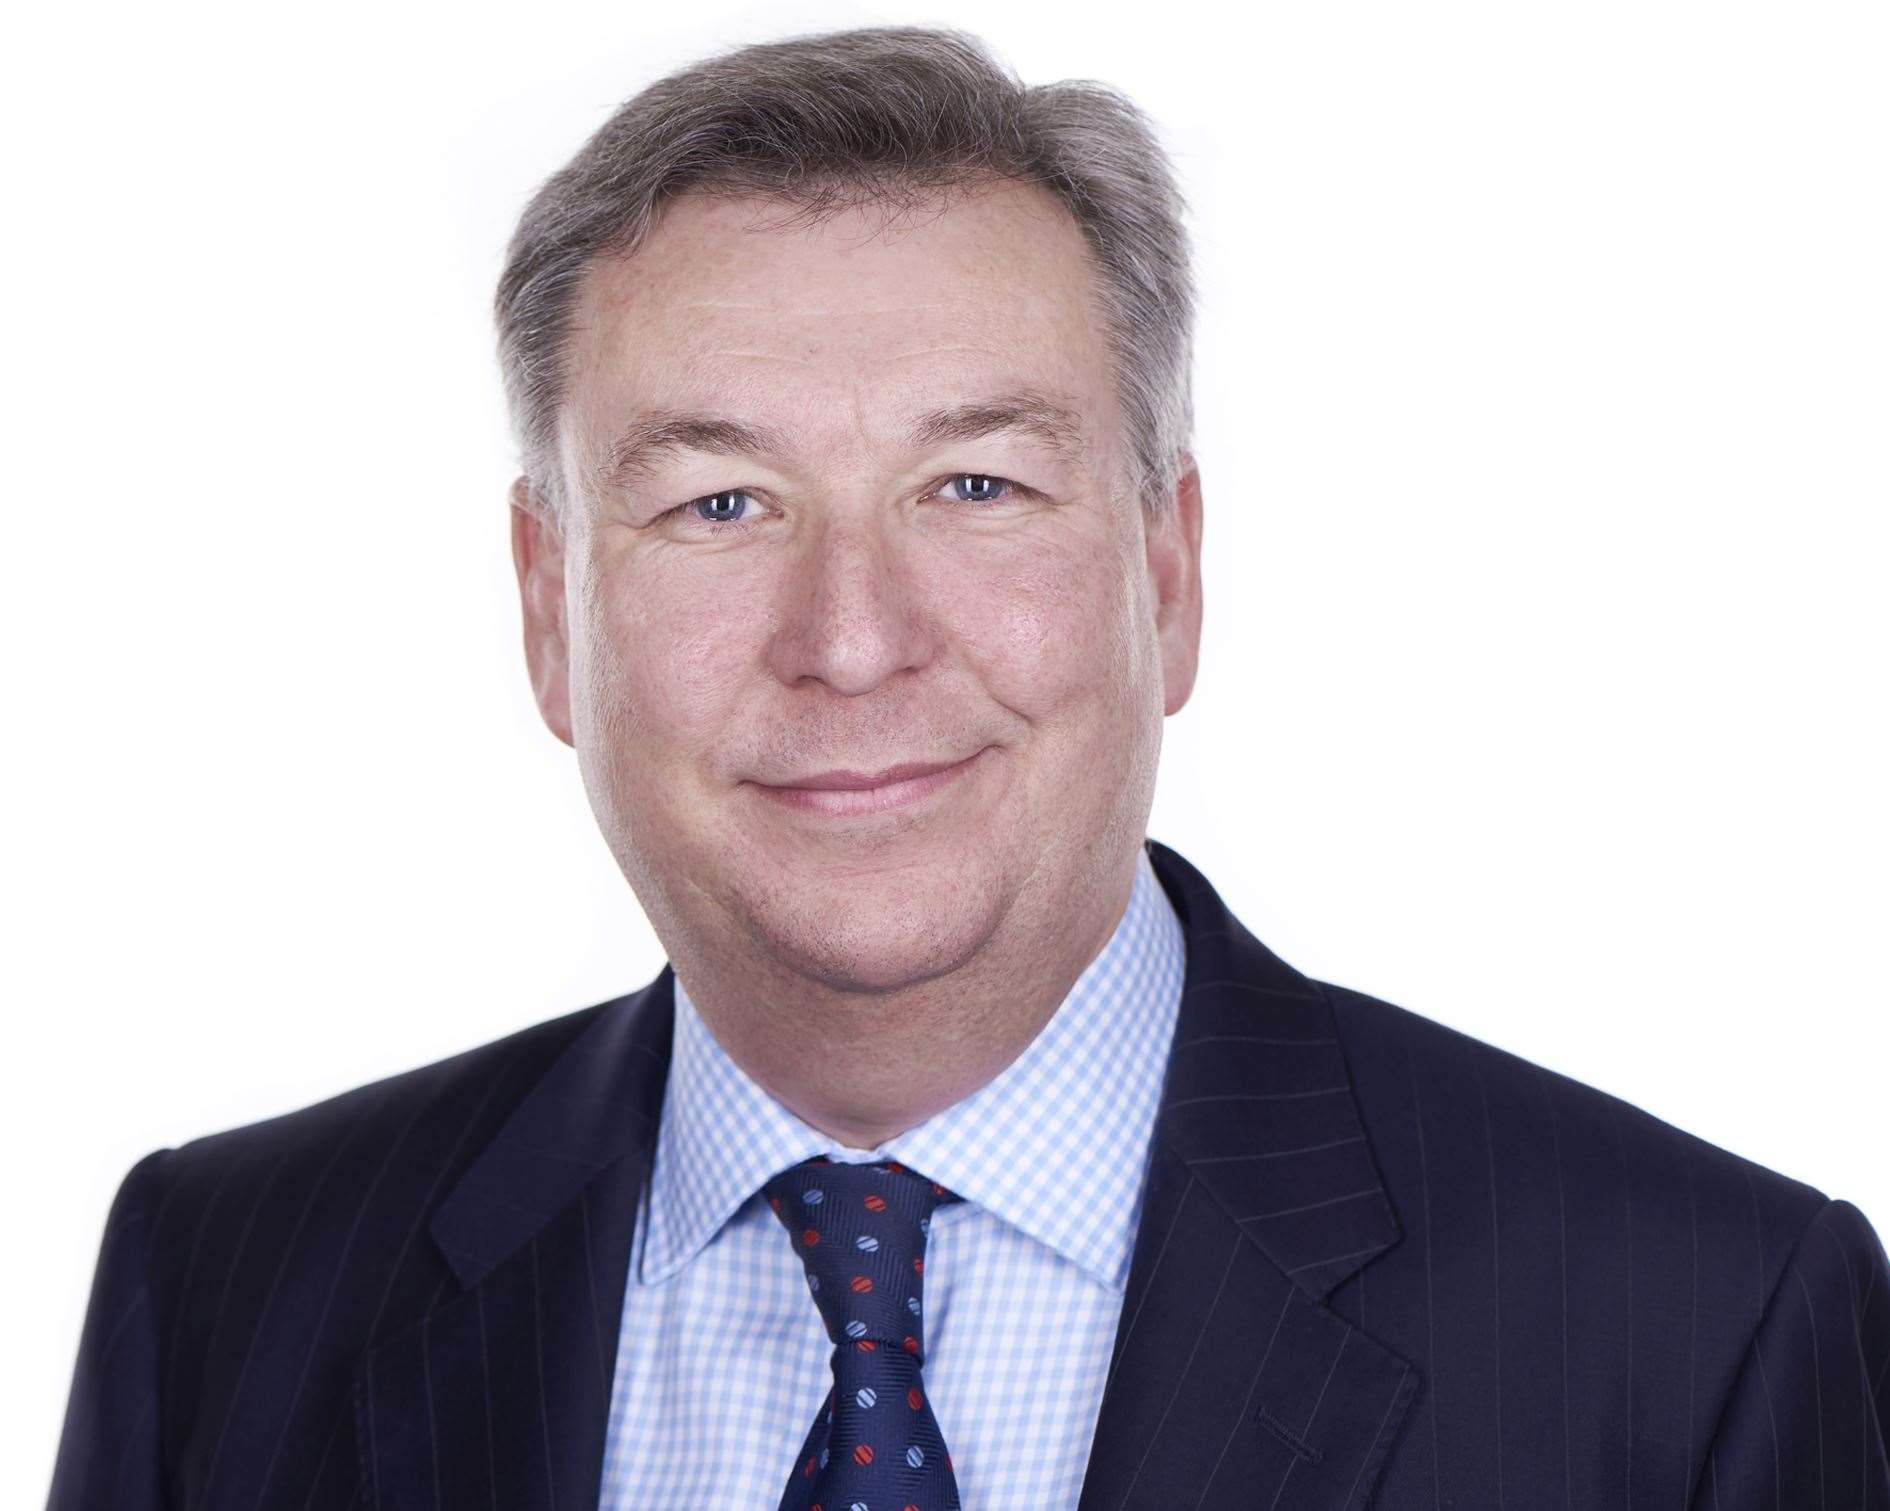 Andrew Masters, partner and head of employment at Furley Page, will conduct the workshops